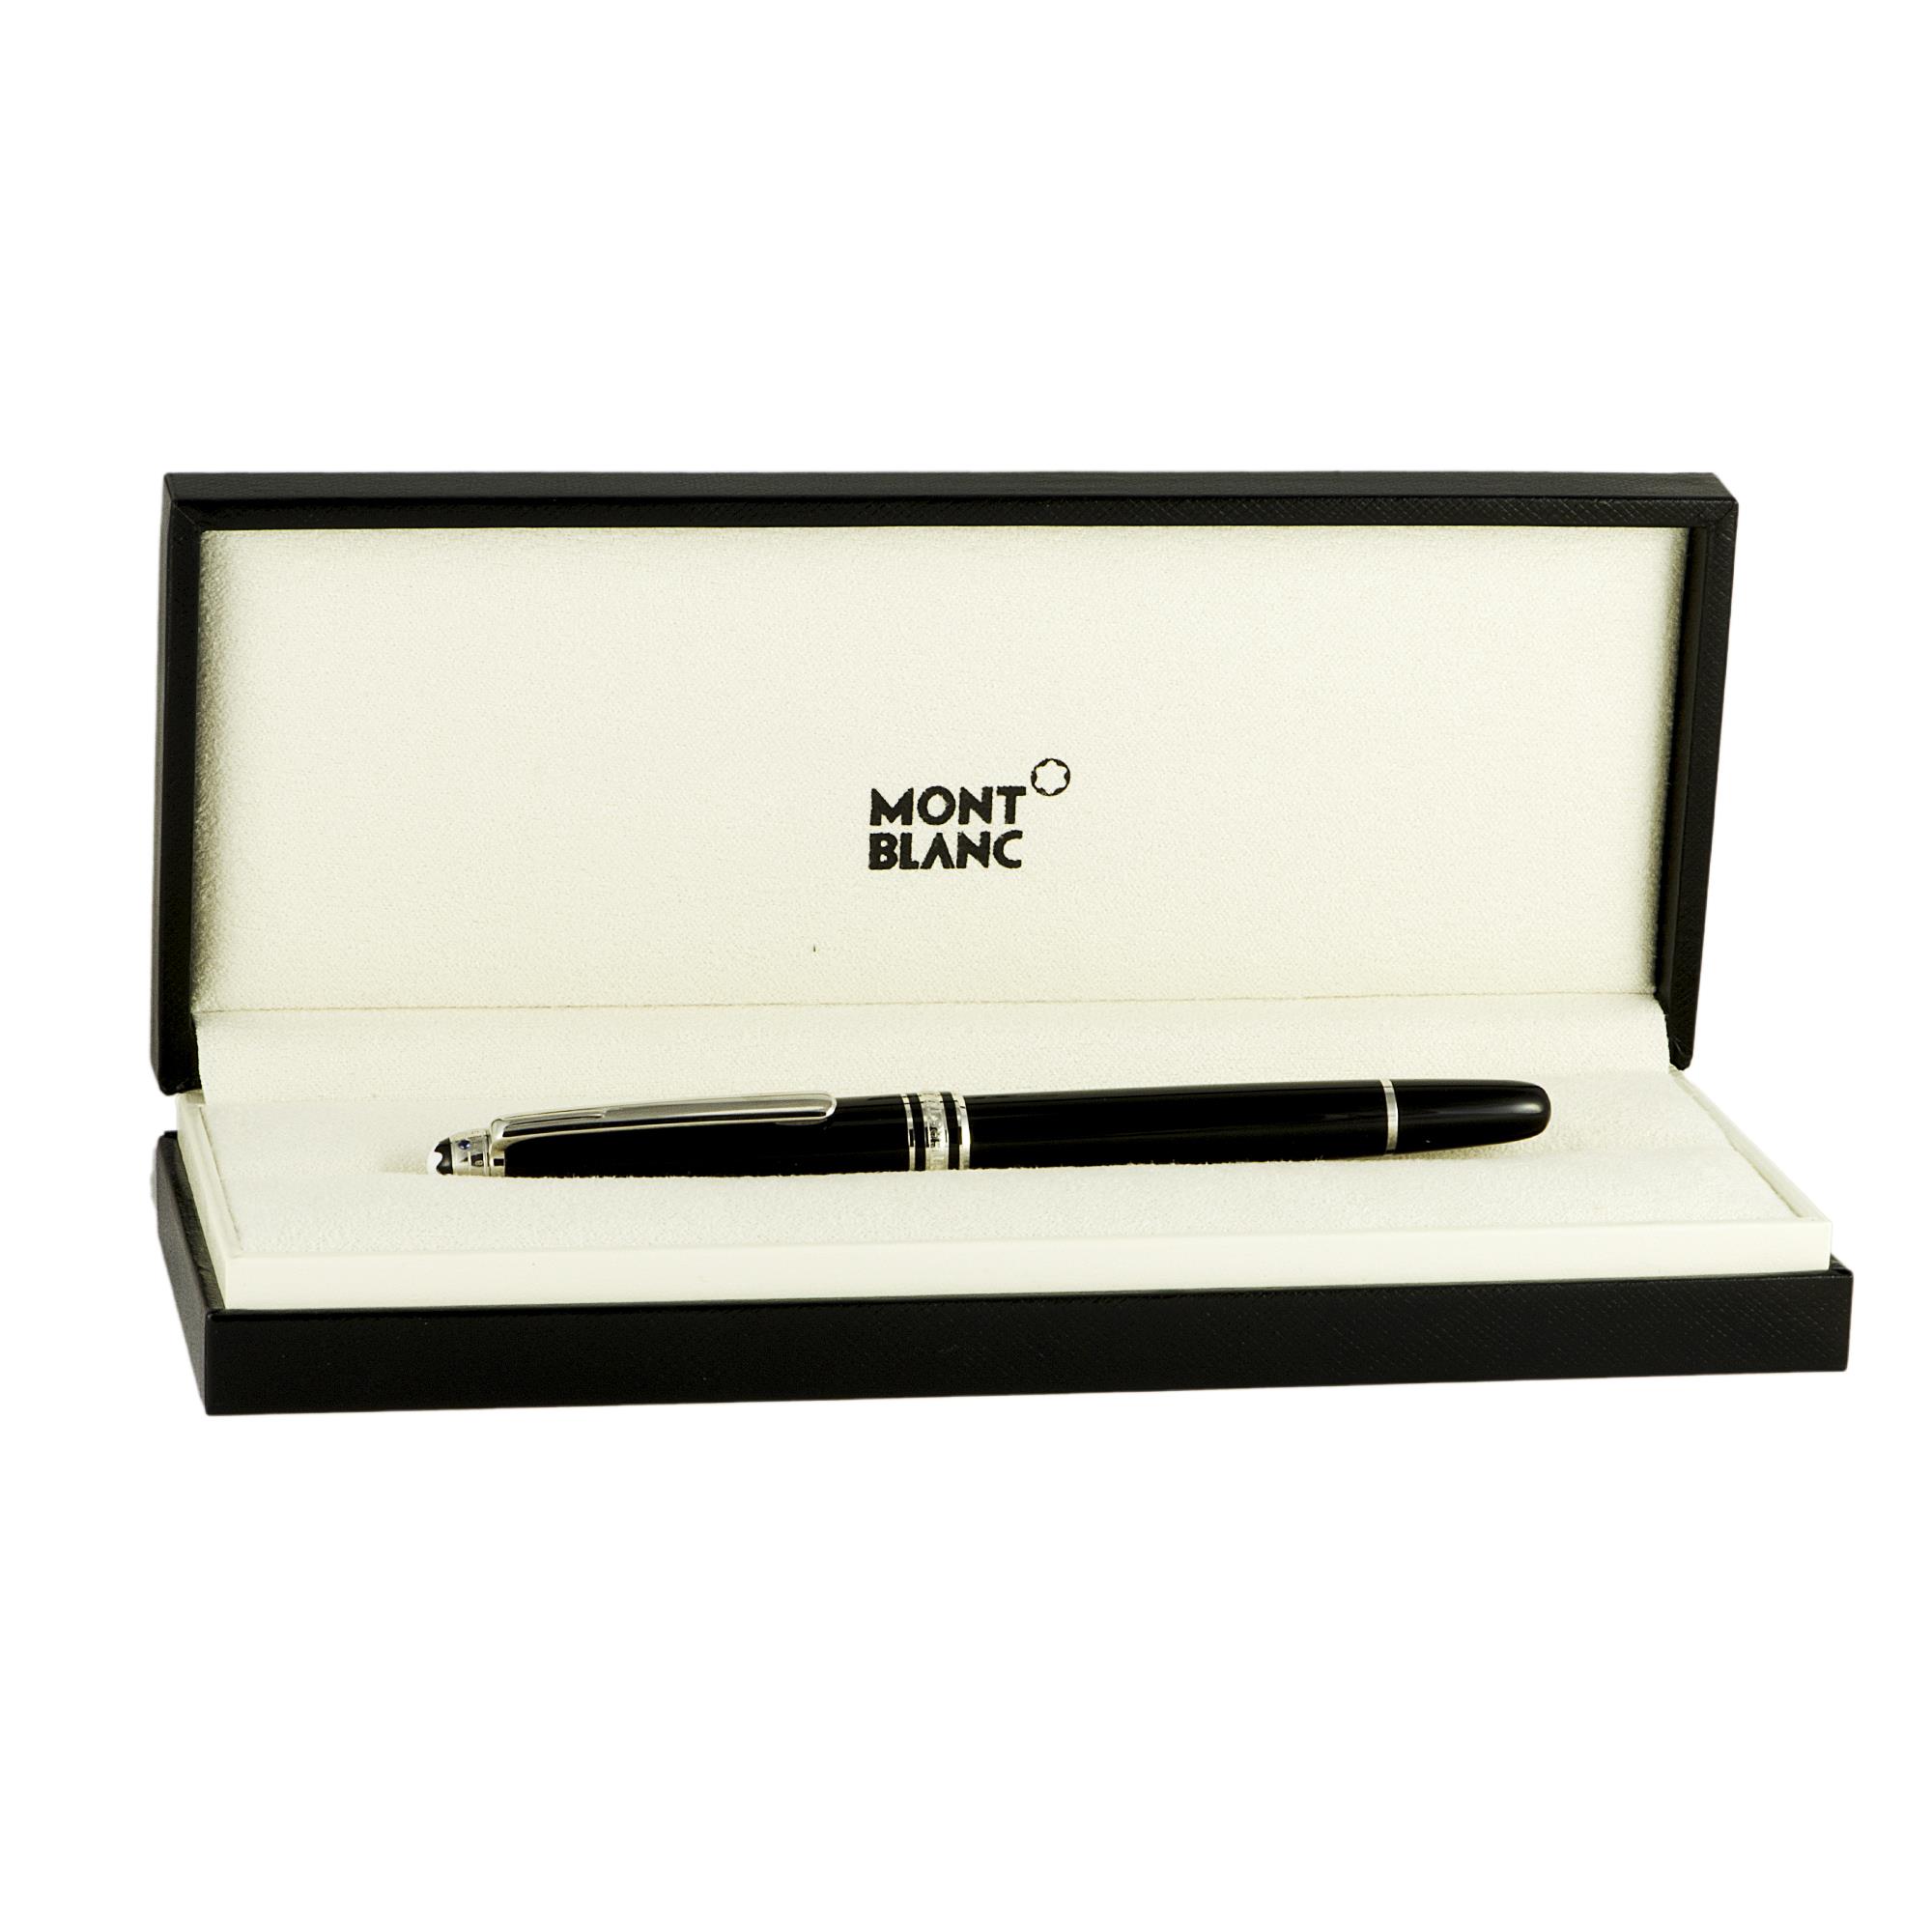 PENNA ROLLER UNICEF SPECIAL EDITION  - MONTBLANC